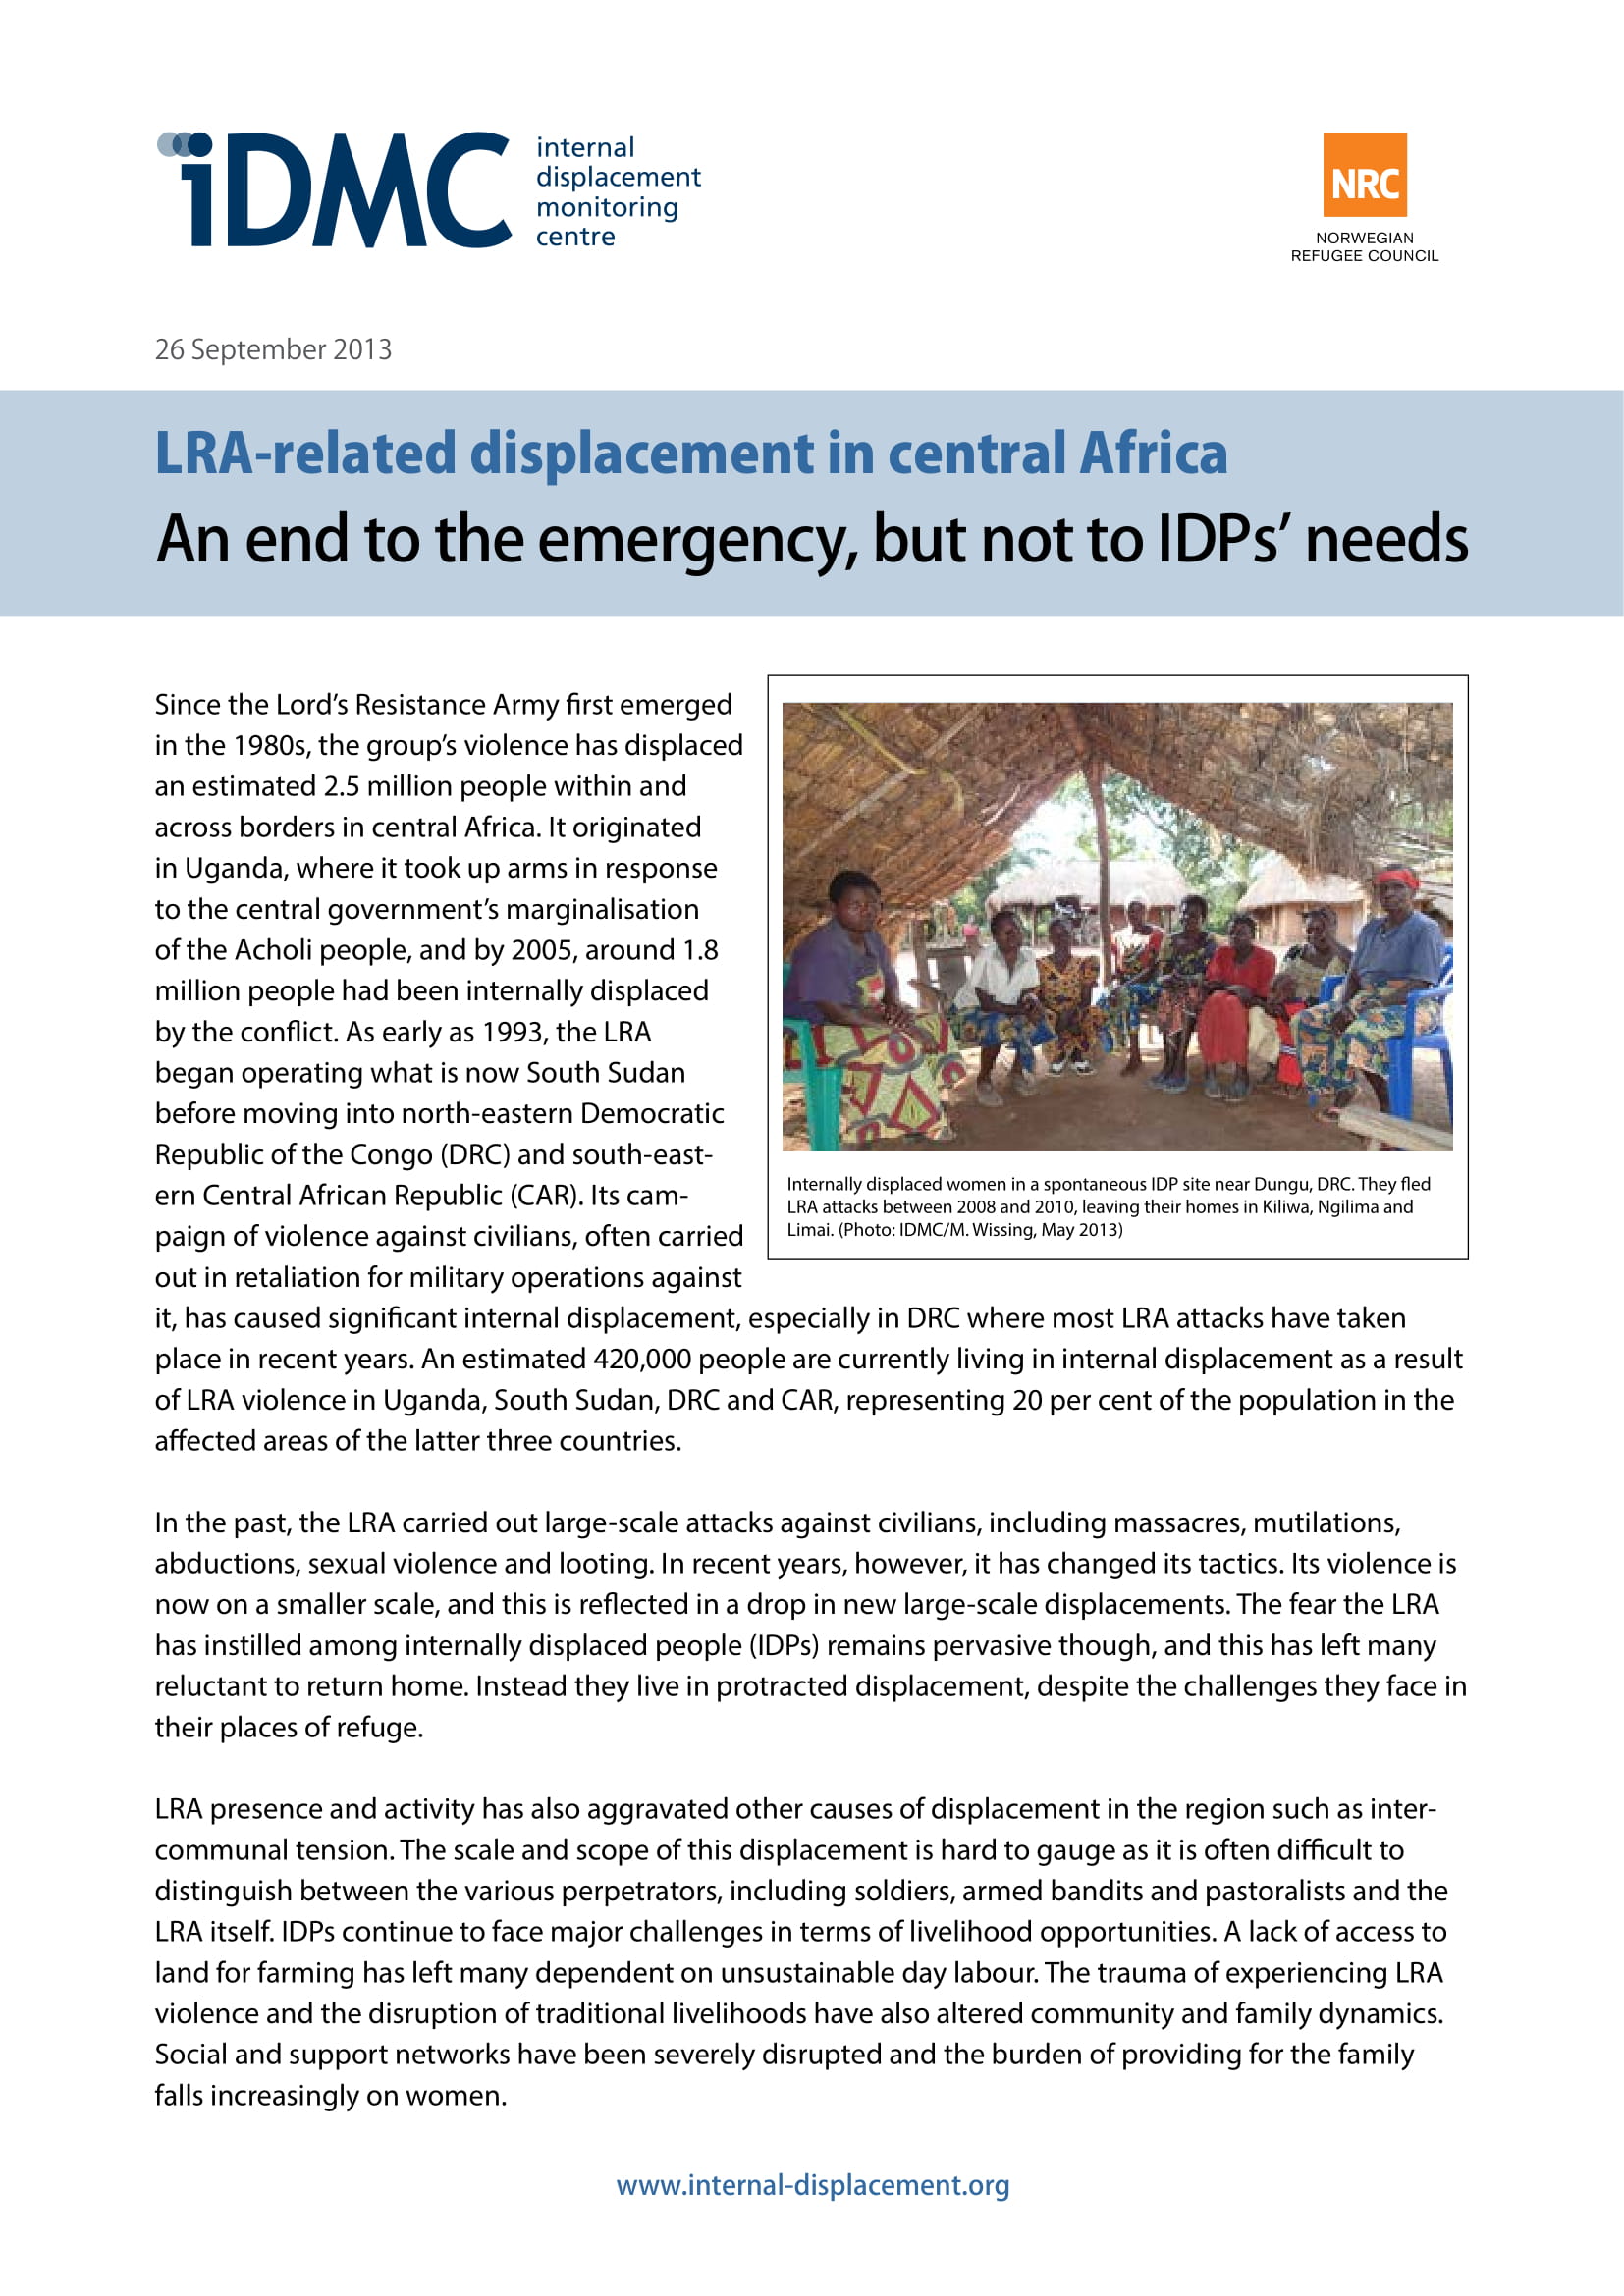 LRA-related displacement in central Africa: An end to the emergency, but not to IDPs’ needs